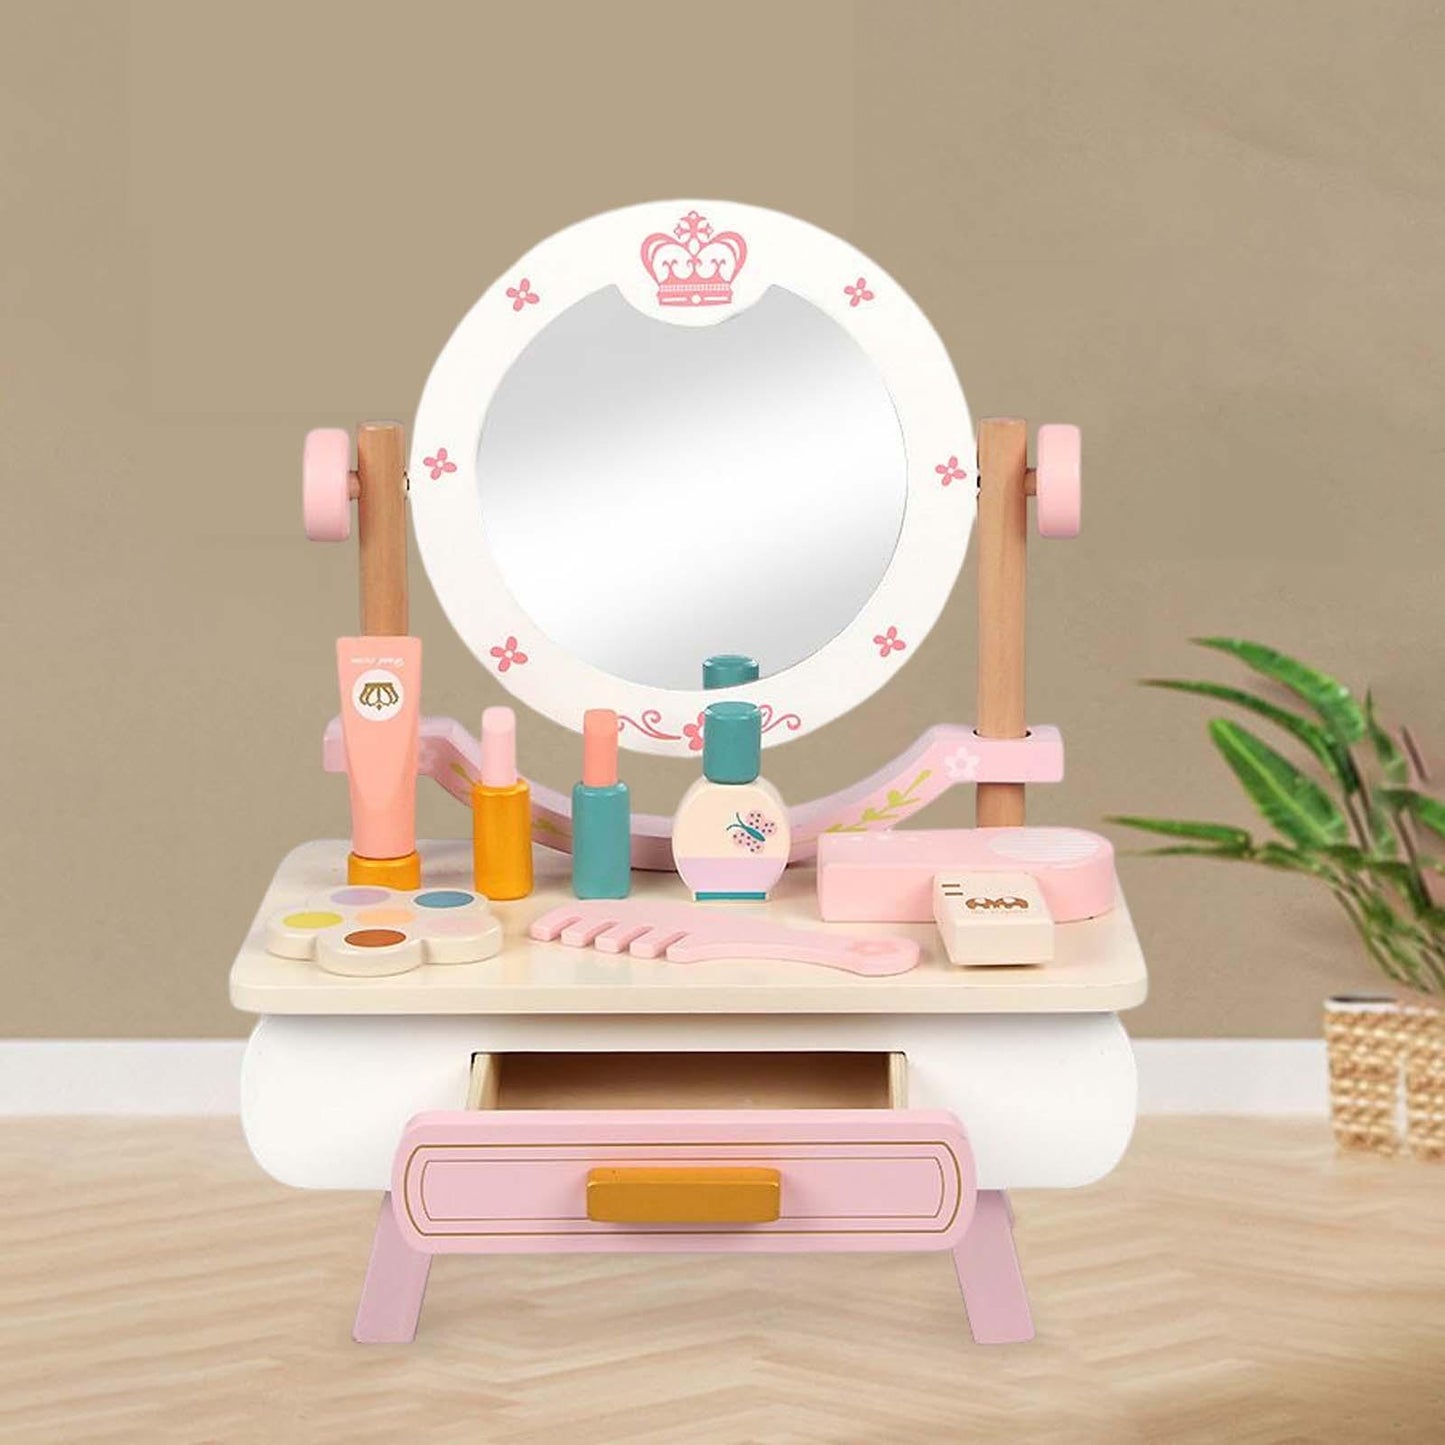 Enchanted Beauty: Wooden Princess Vanity Table with Makeup Accessories